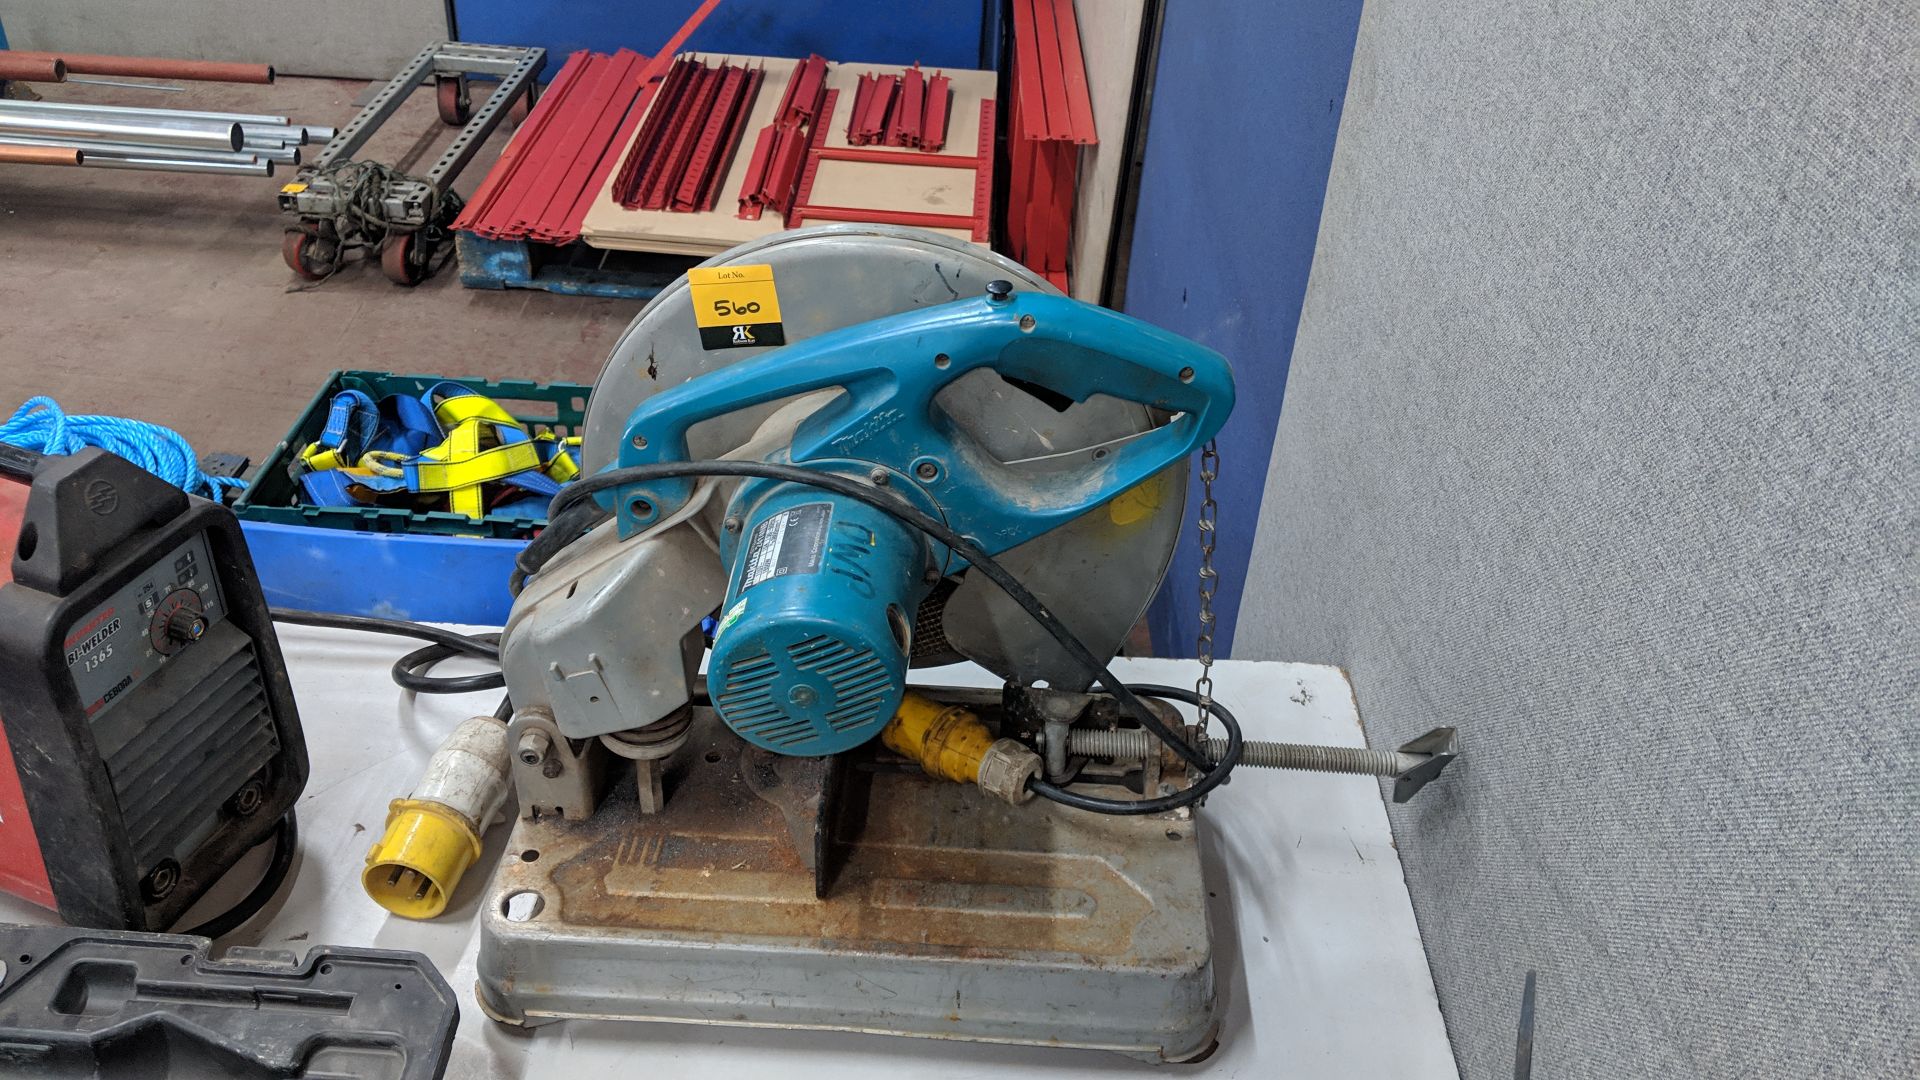 Makita 110v pull down chop saw model 2414NB This is one of a number of lots being sold on behalf - Image 2 of 5